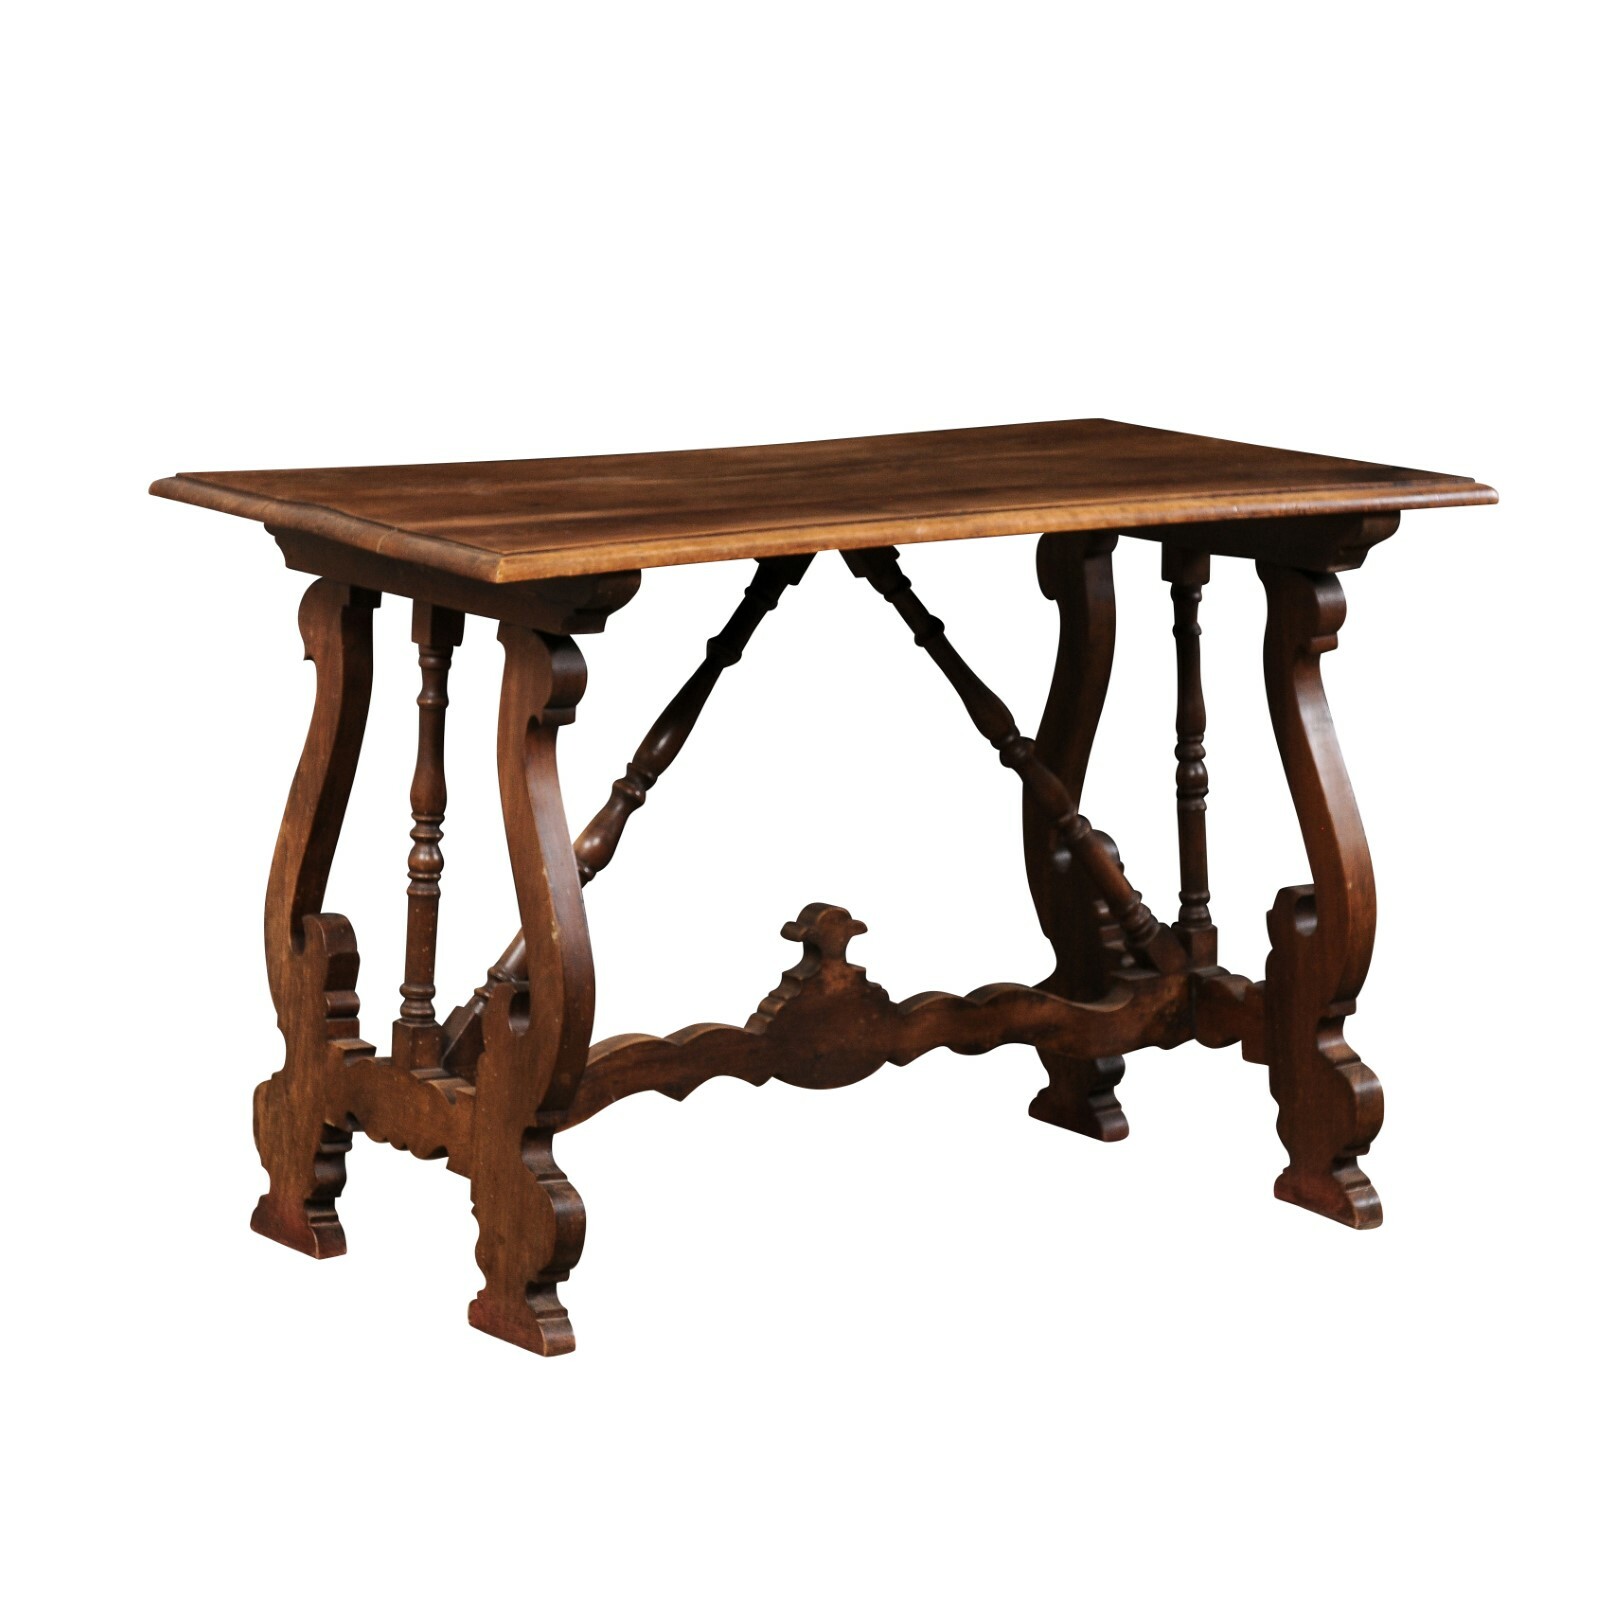 Spanish 19th C. Lyre Desk or Console Table